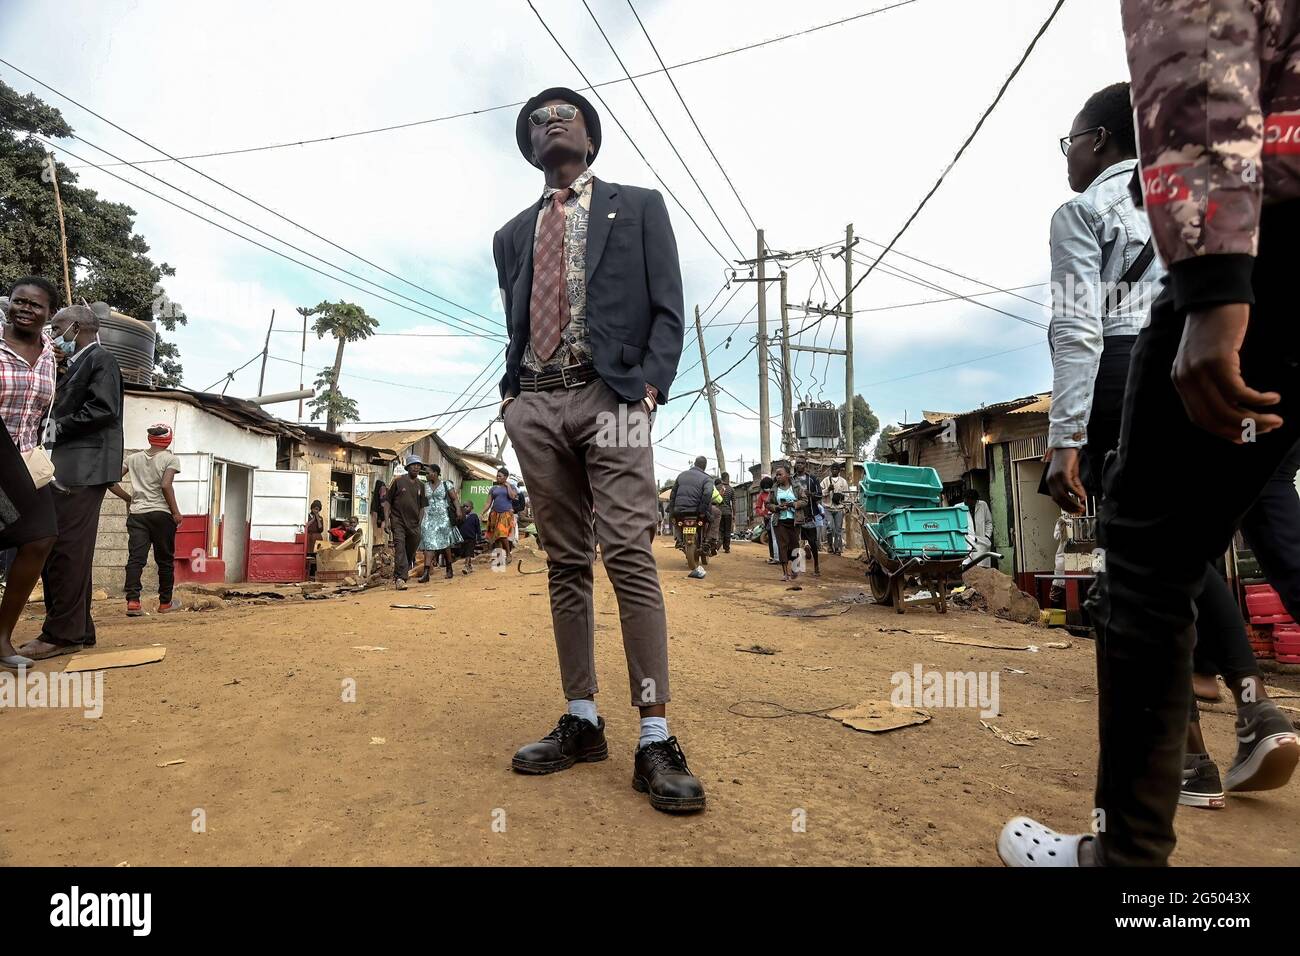 21-year-old Jactone Omondi, a professional electrician and a model poses by  the streets dressed in his Vintage outfits in Kibera. Modern fashion is now  becoming a new trend practiced by different individuals